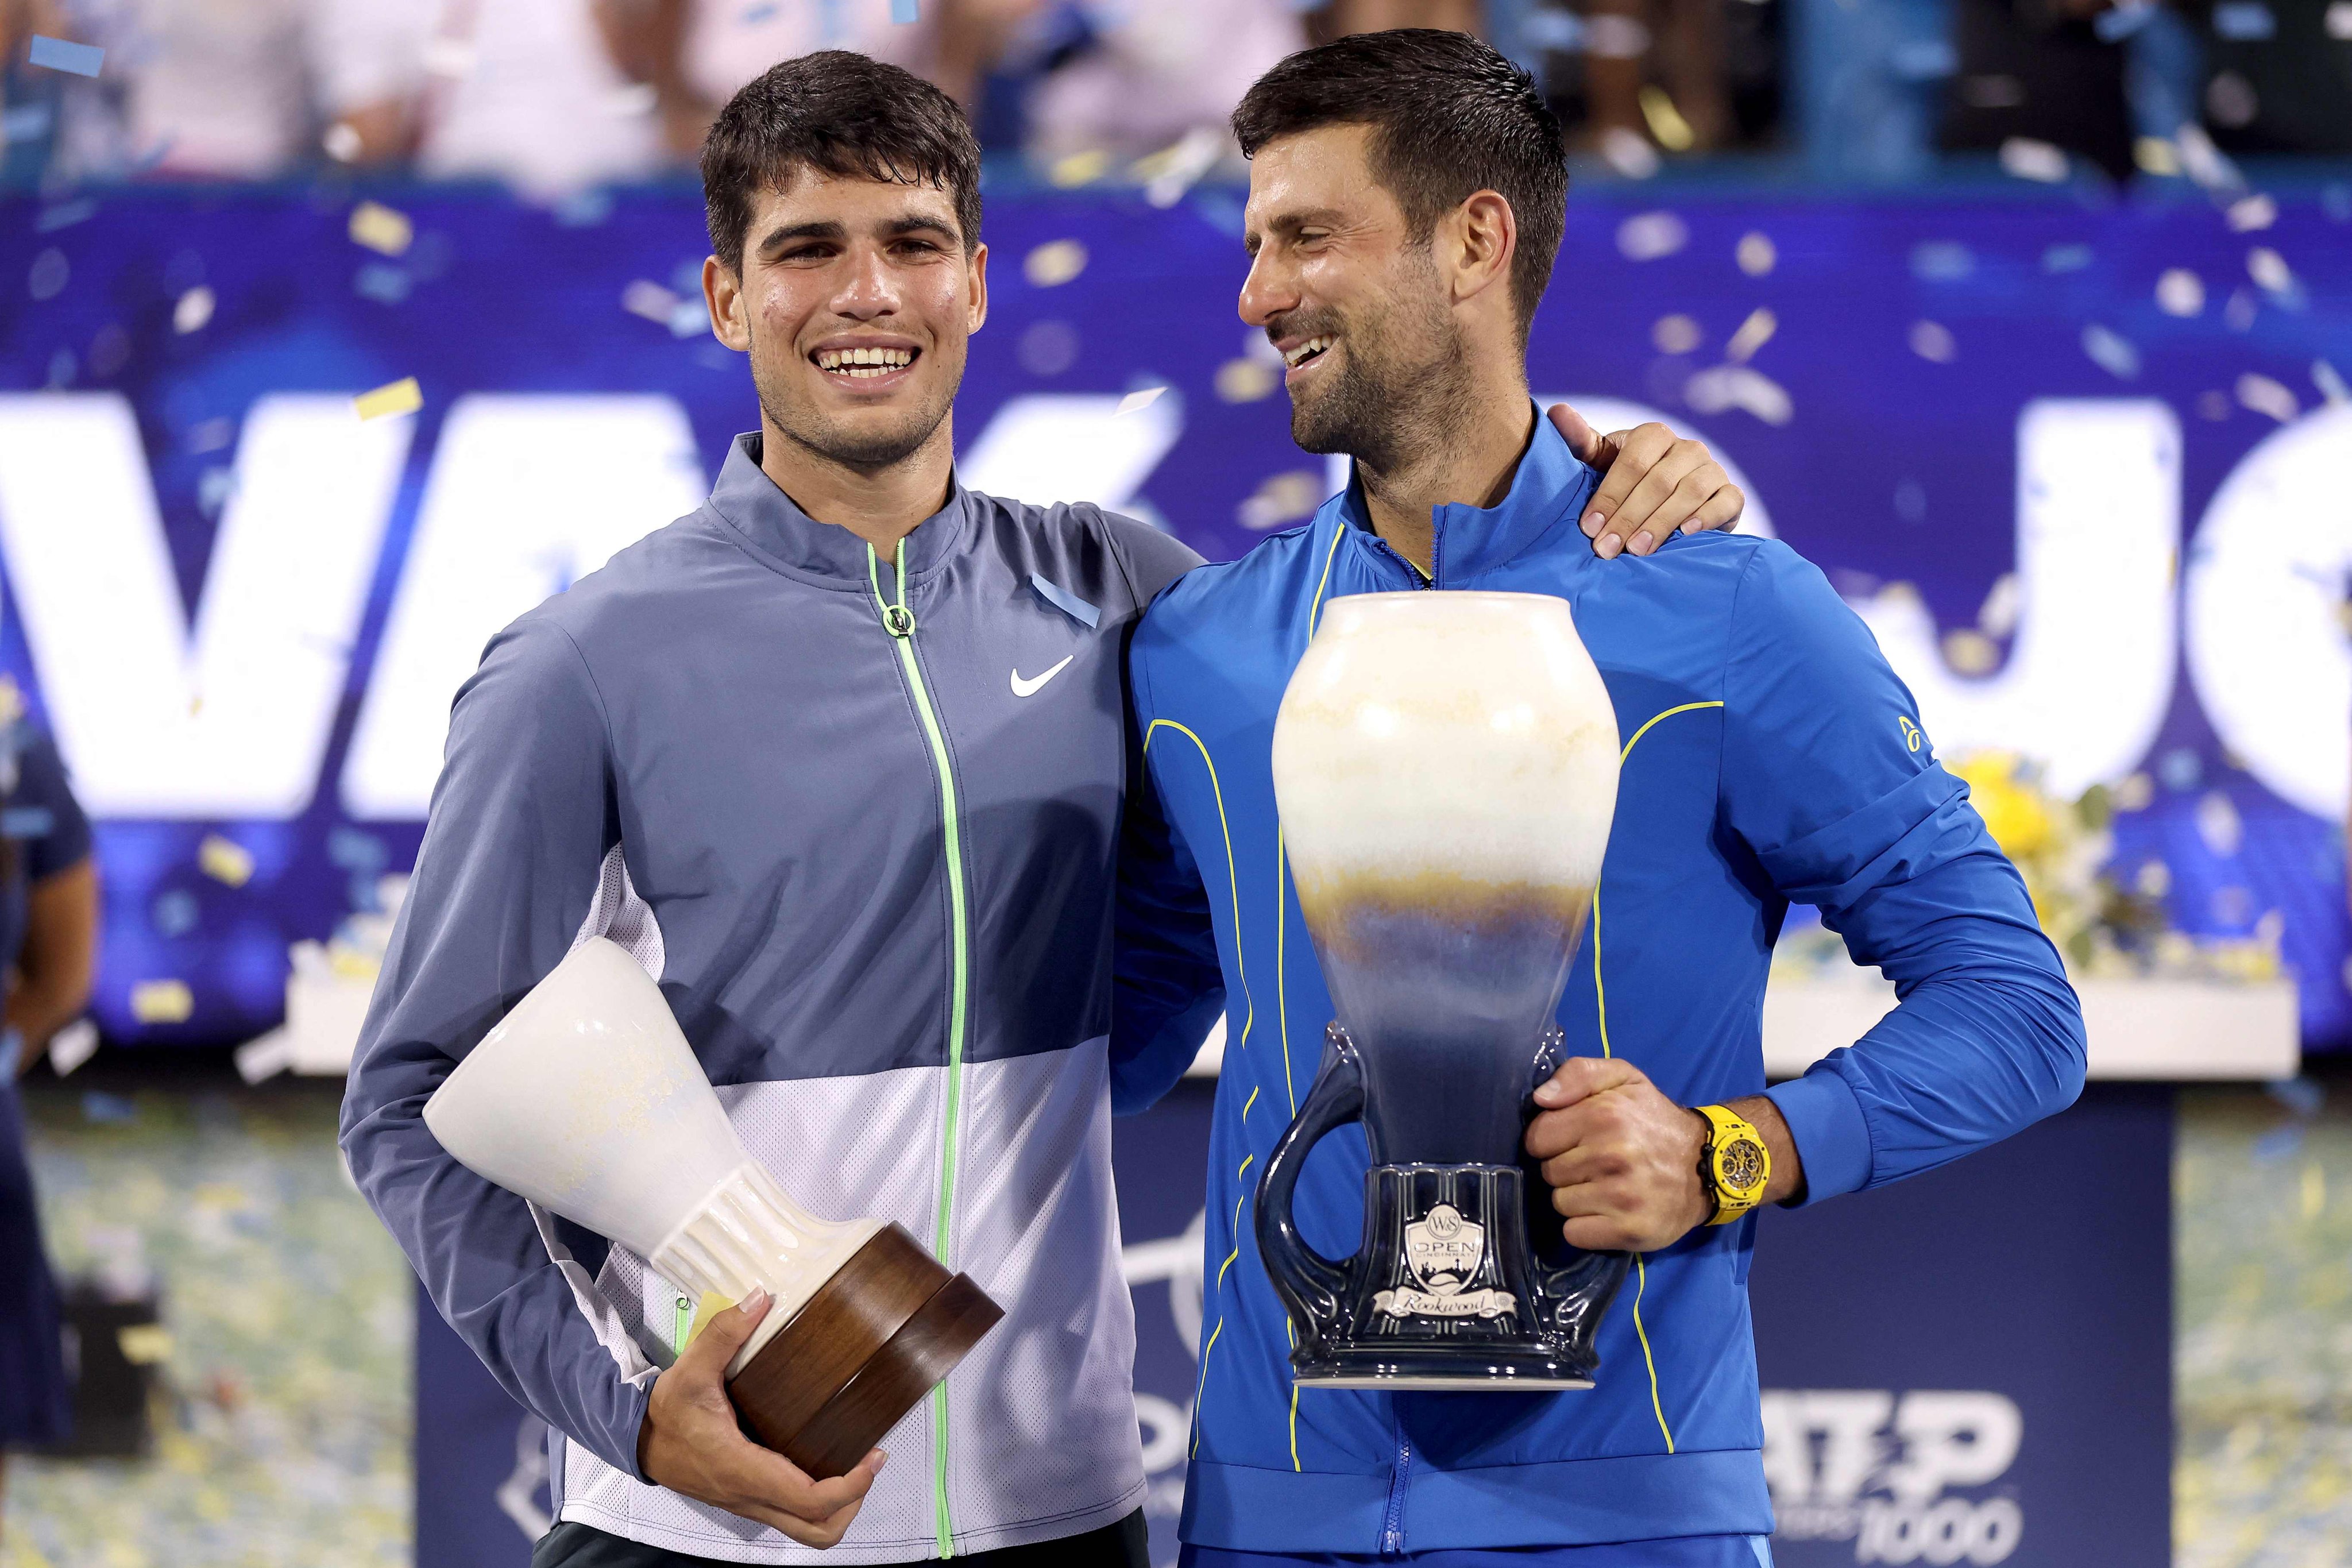 Novak Djokovic was visited by the doctor for heatstroke during his epic win over Carlos Alcaraz. Photo: AFP